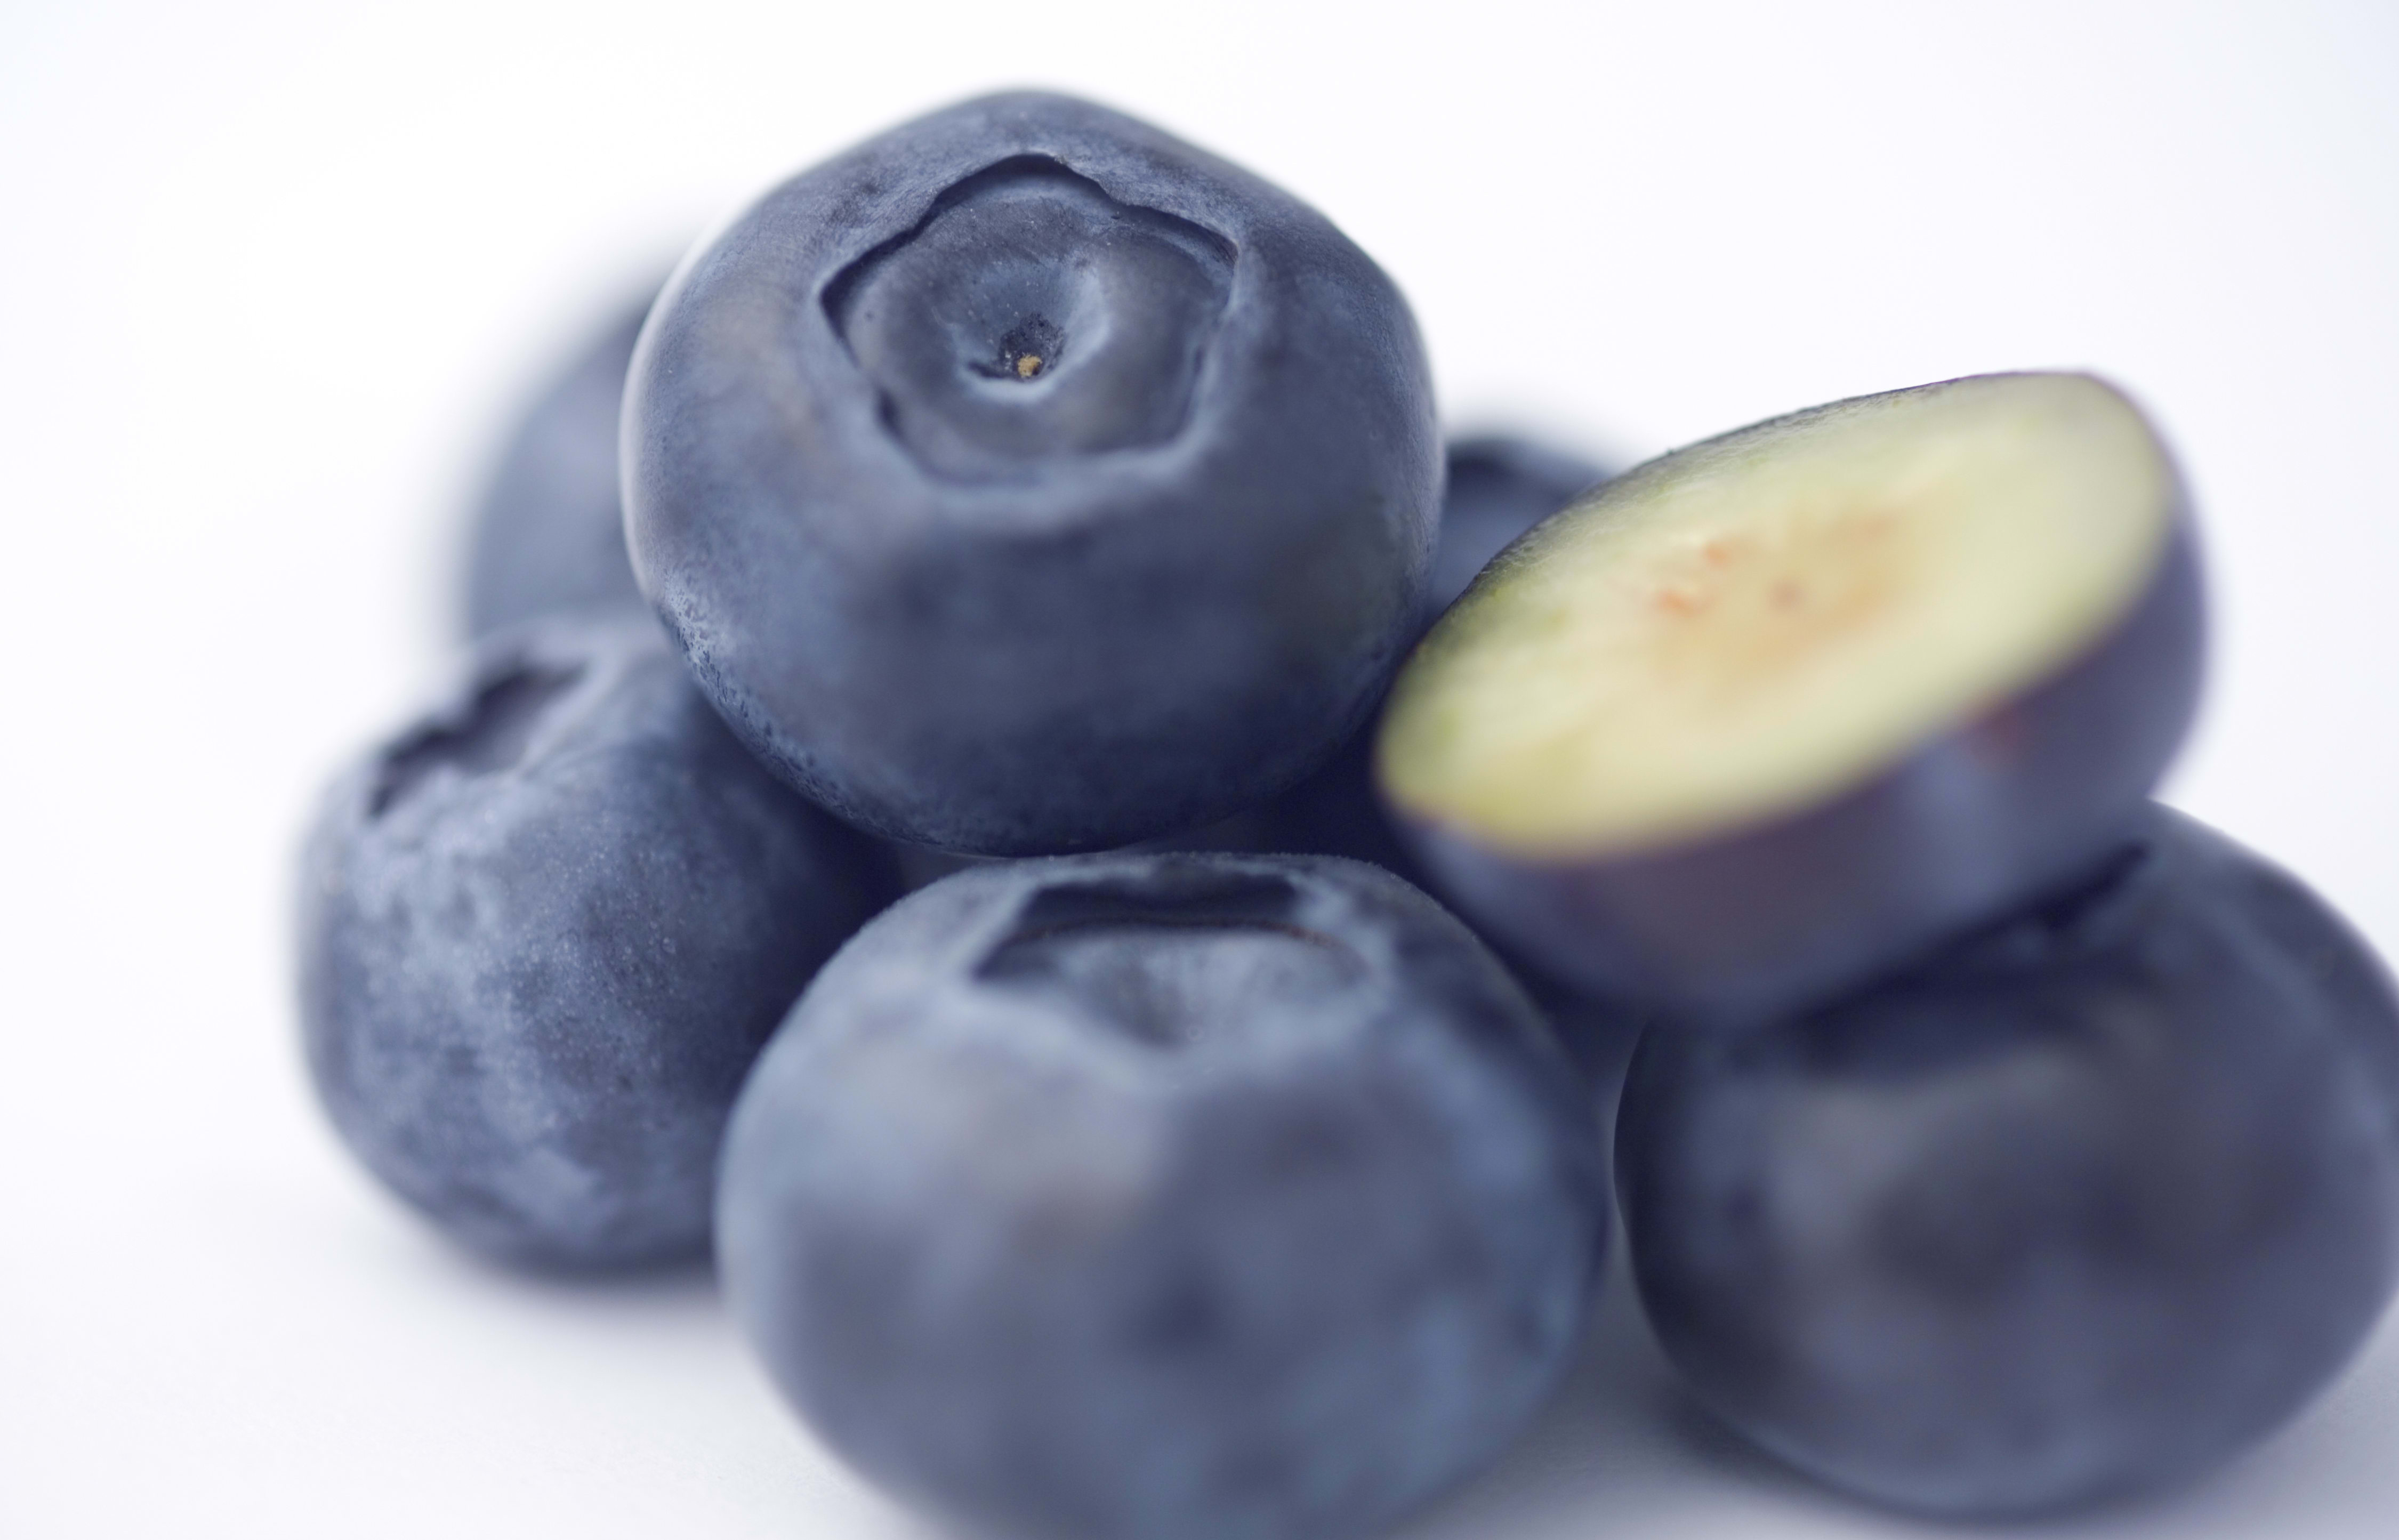 Plant and Food Research is trying to breed a hybrid superfruit that combines the taste and growing characteristics of blueberries with the colourful flesh of bilberries.